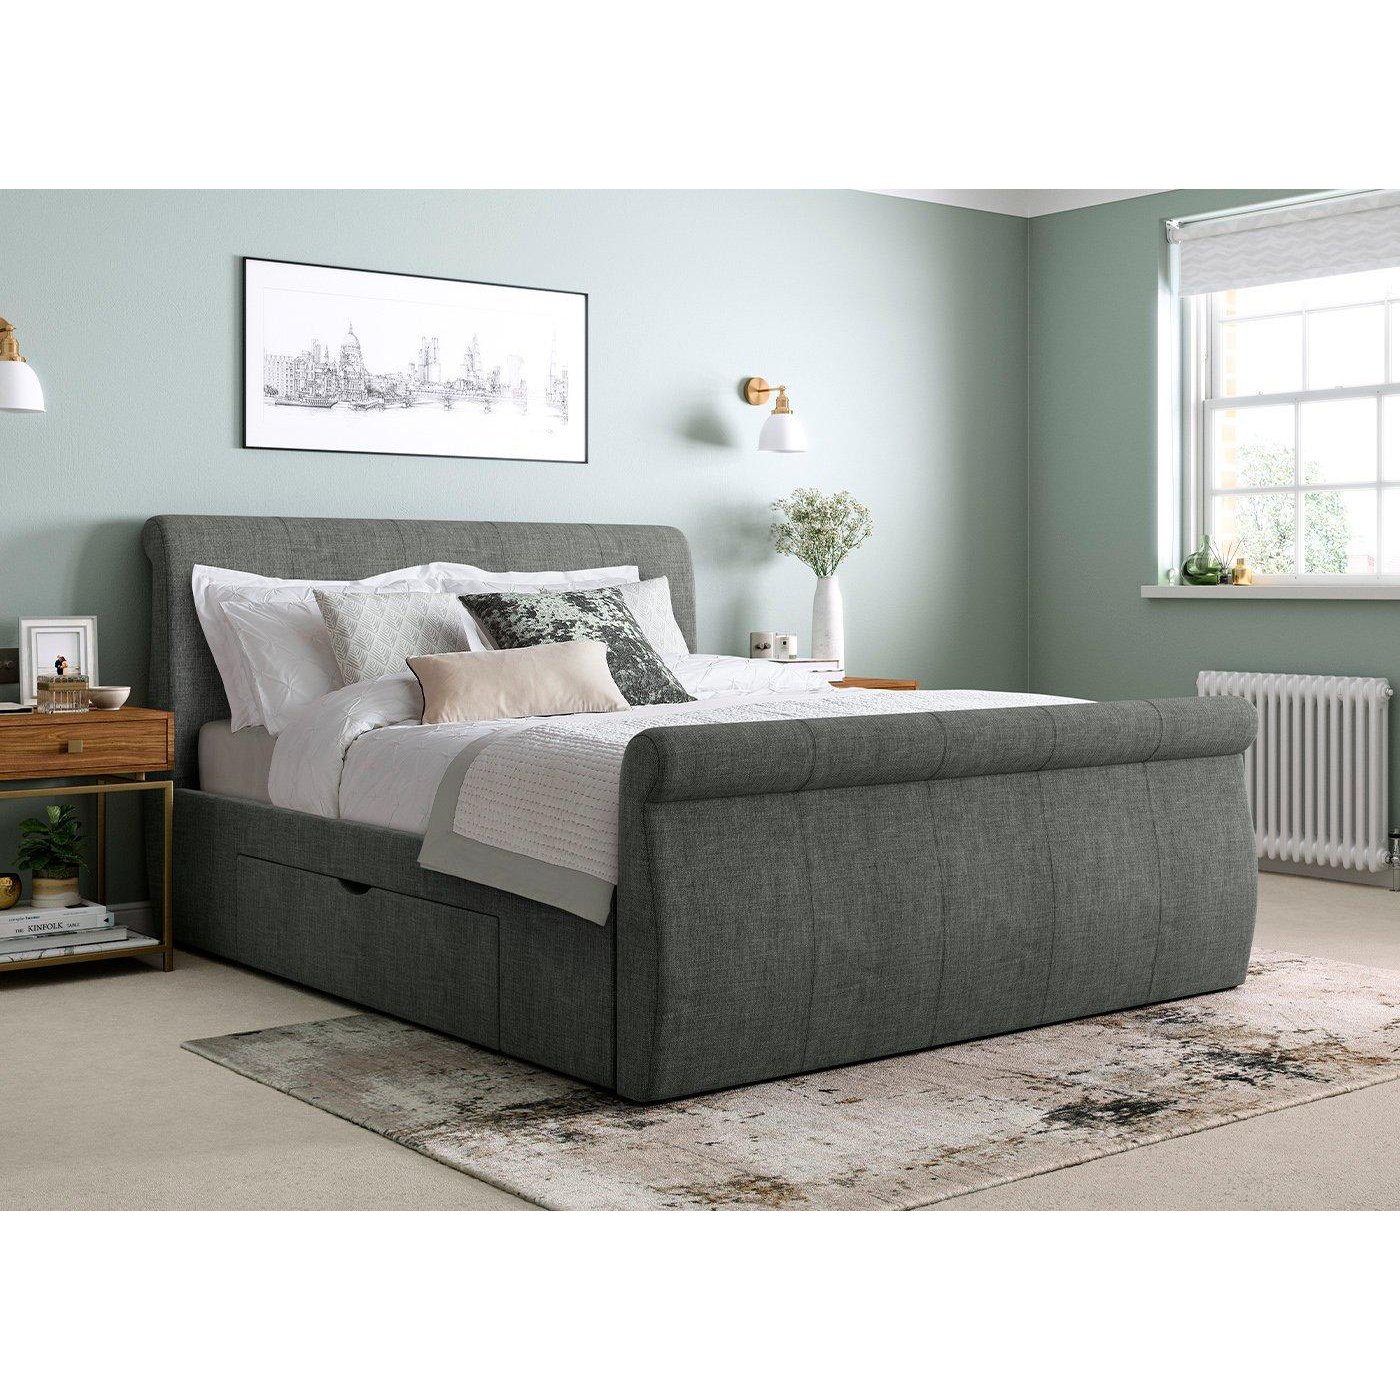 Lucia Upholstered Bed Frame - 4'0 Small Double - Grey